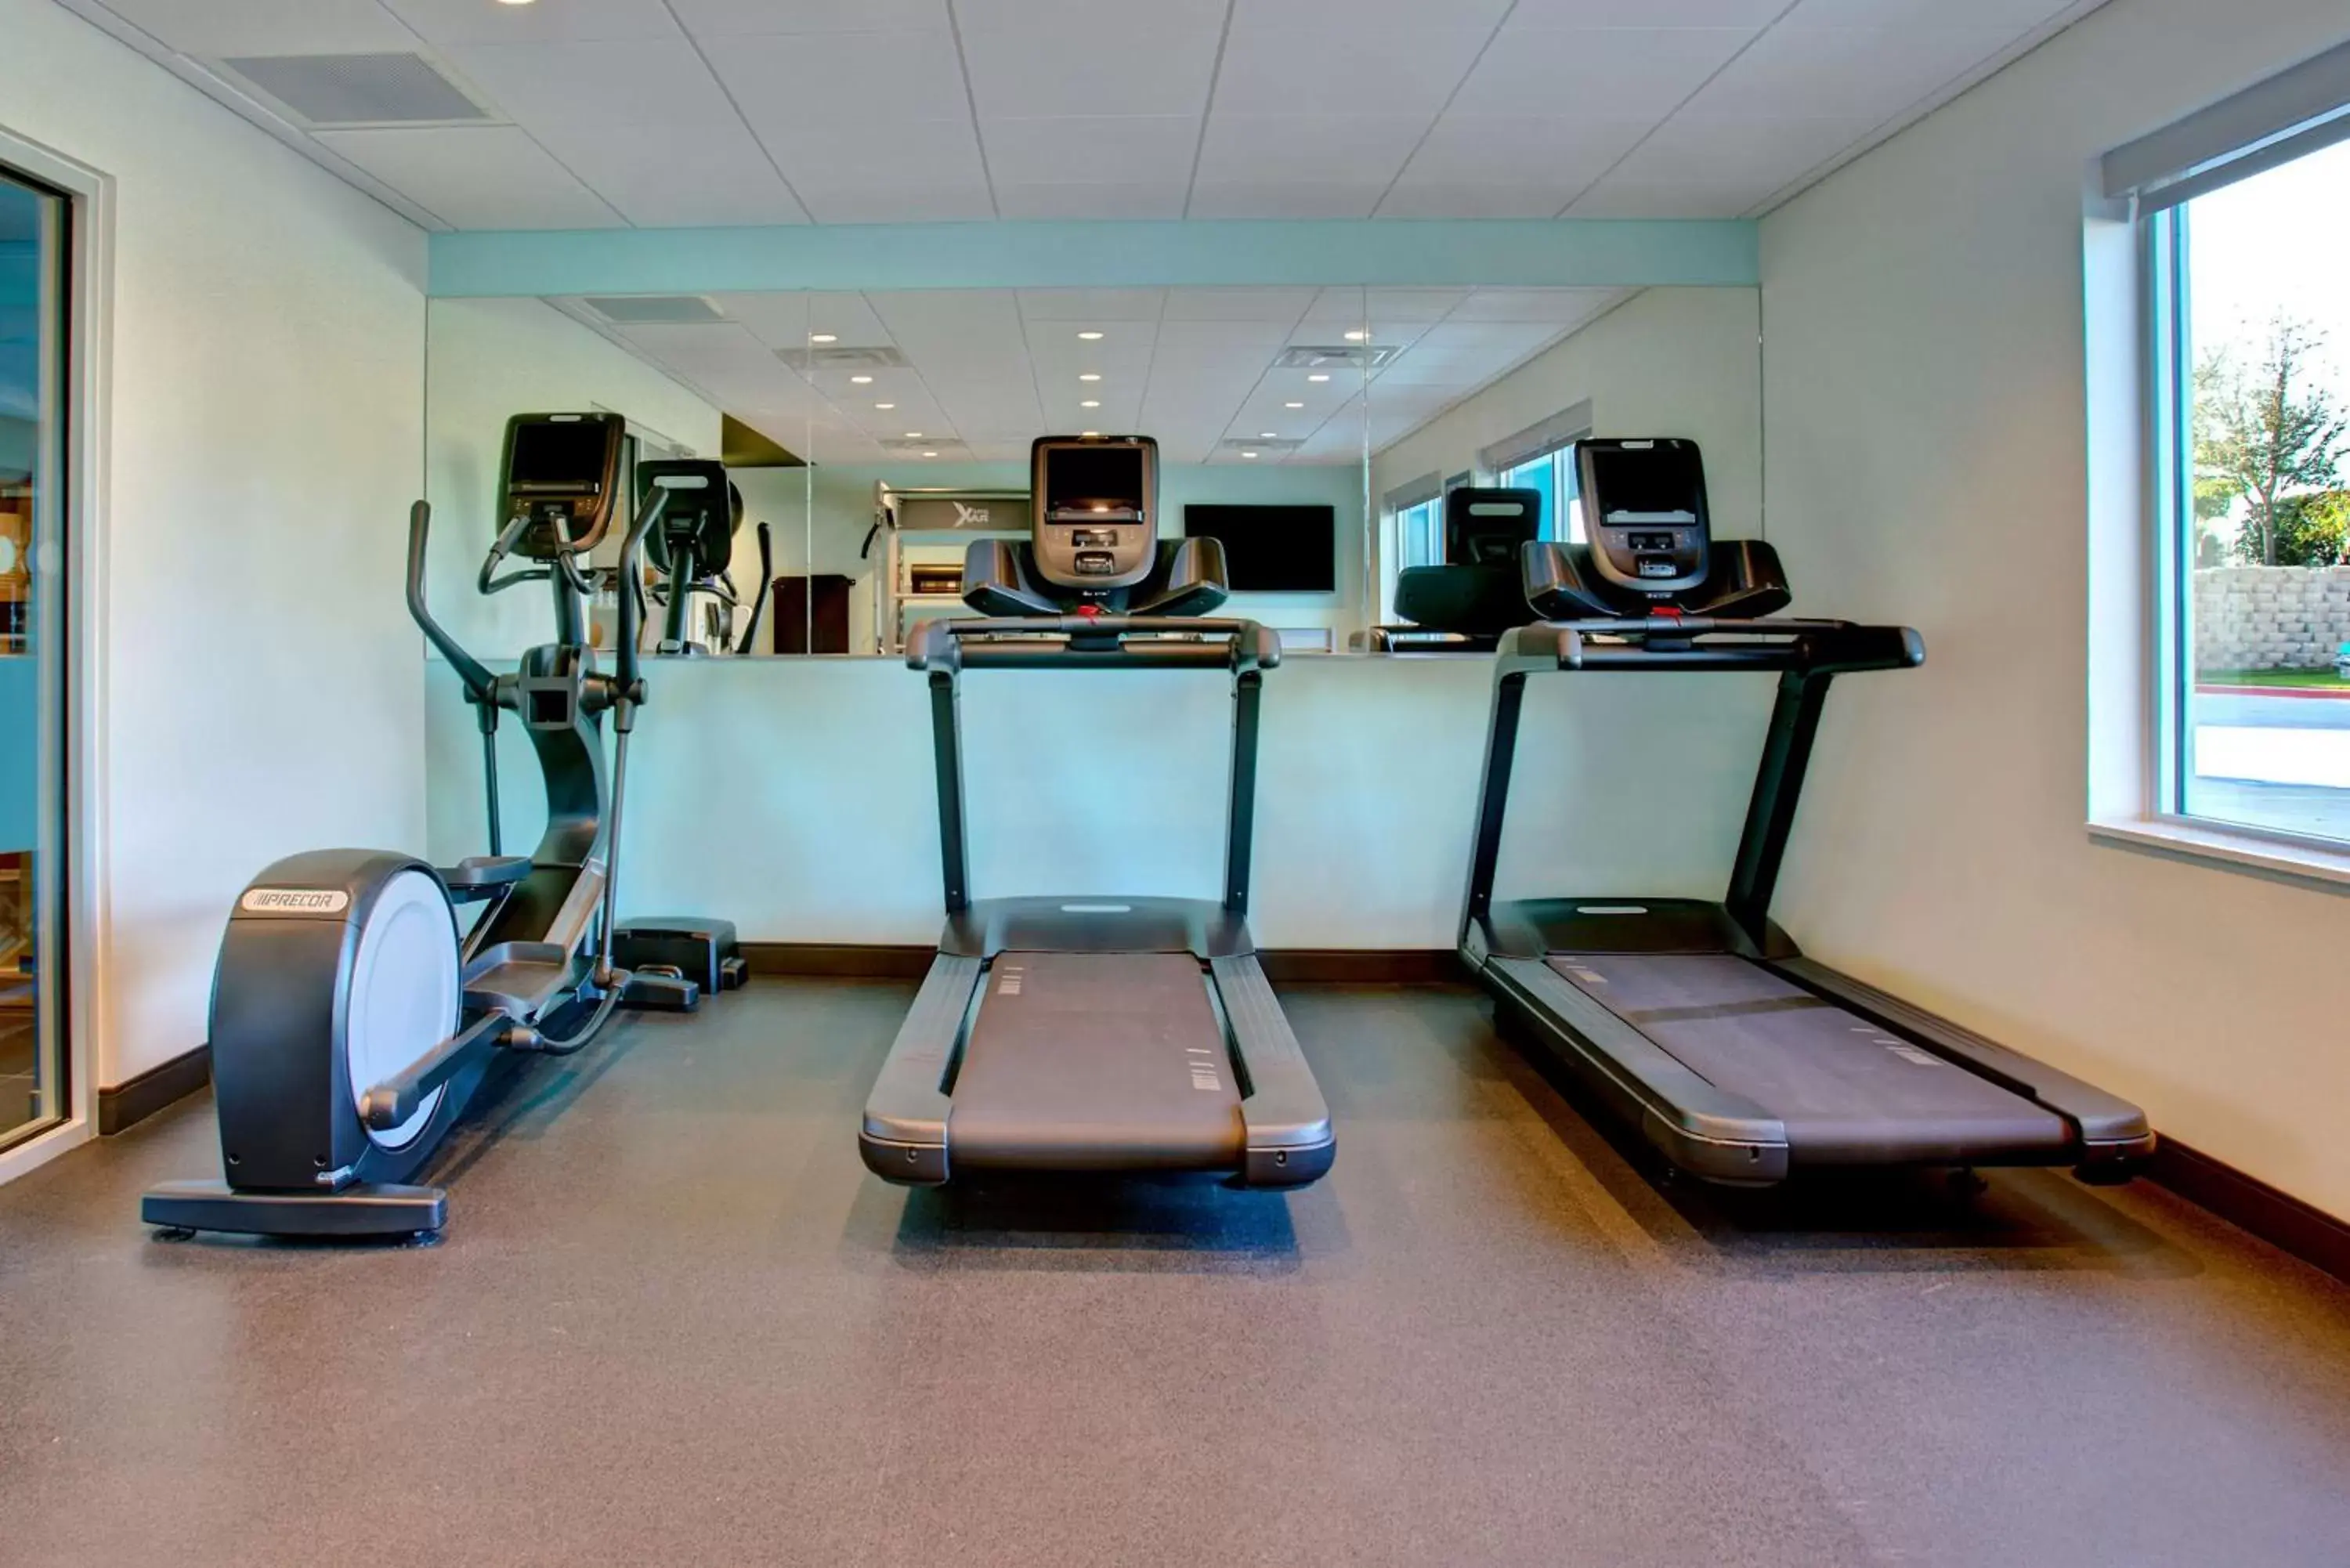 Fitness centre/facilities, Fitness Center/Facilities in Tru By Hilton Northlake Fort Worth, Tx